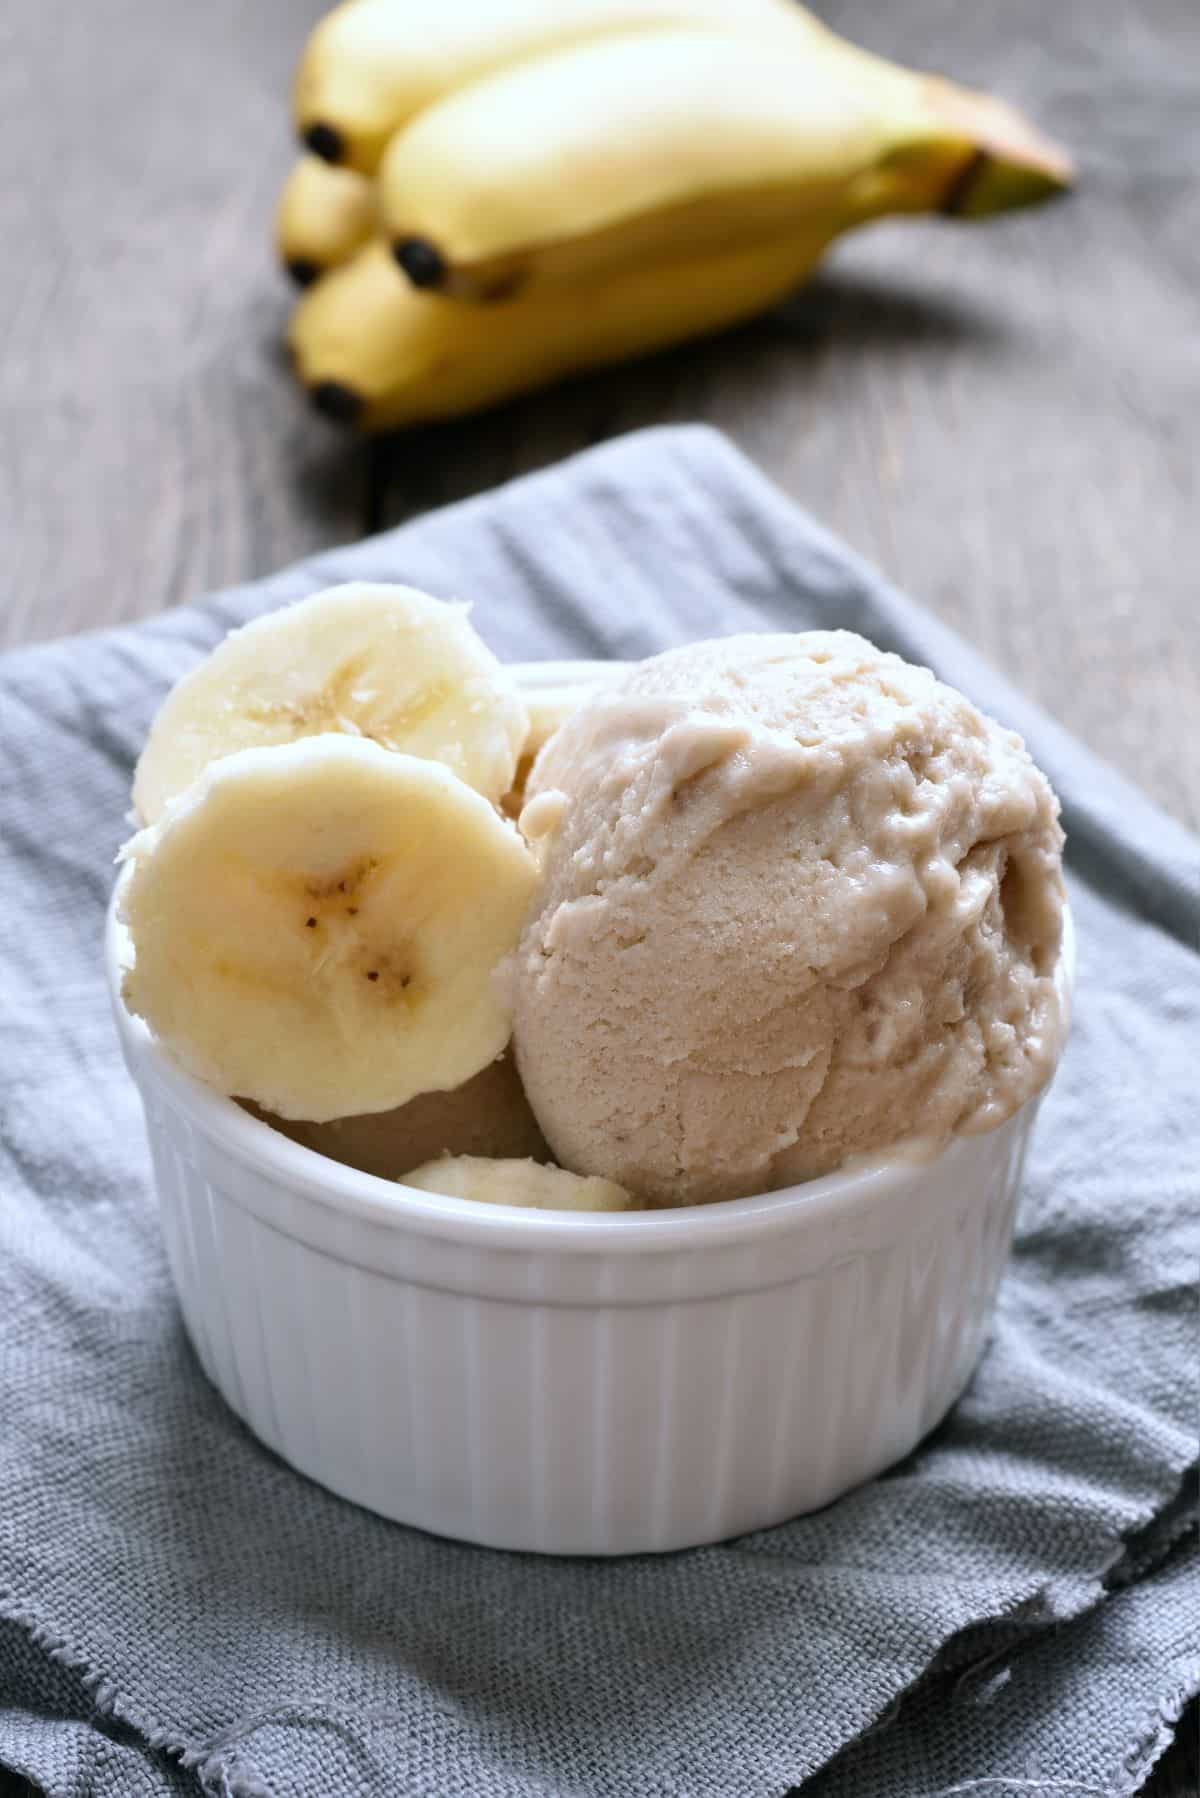 Fresh bananas and pudding with ice cream in a bowl with ripe bananas in the background.